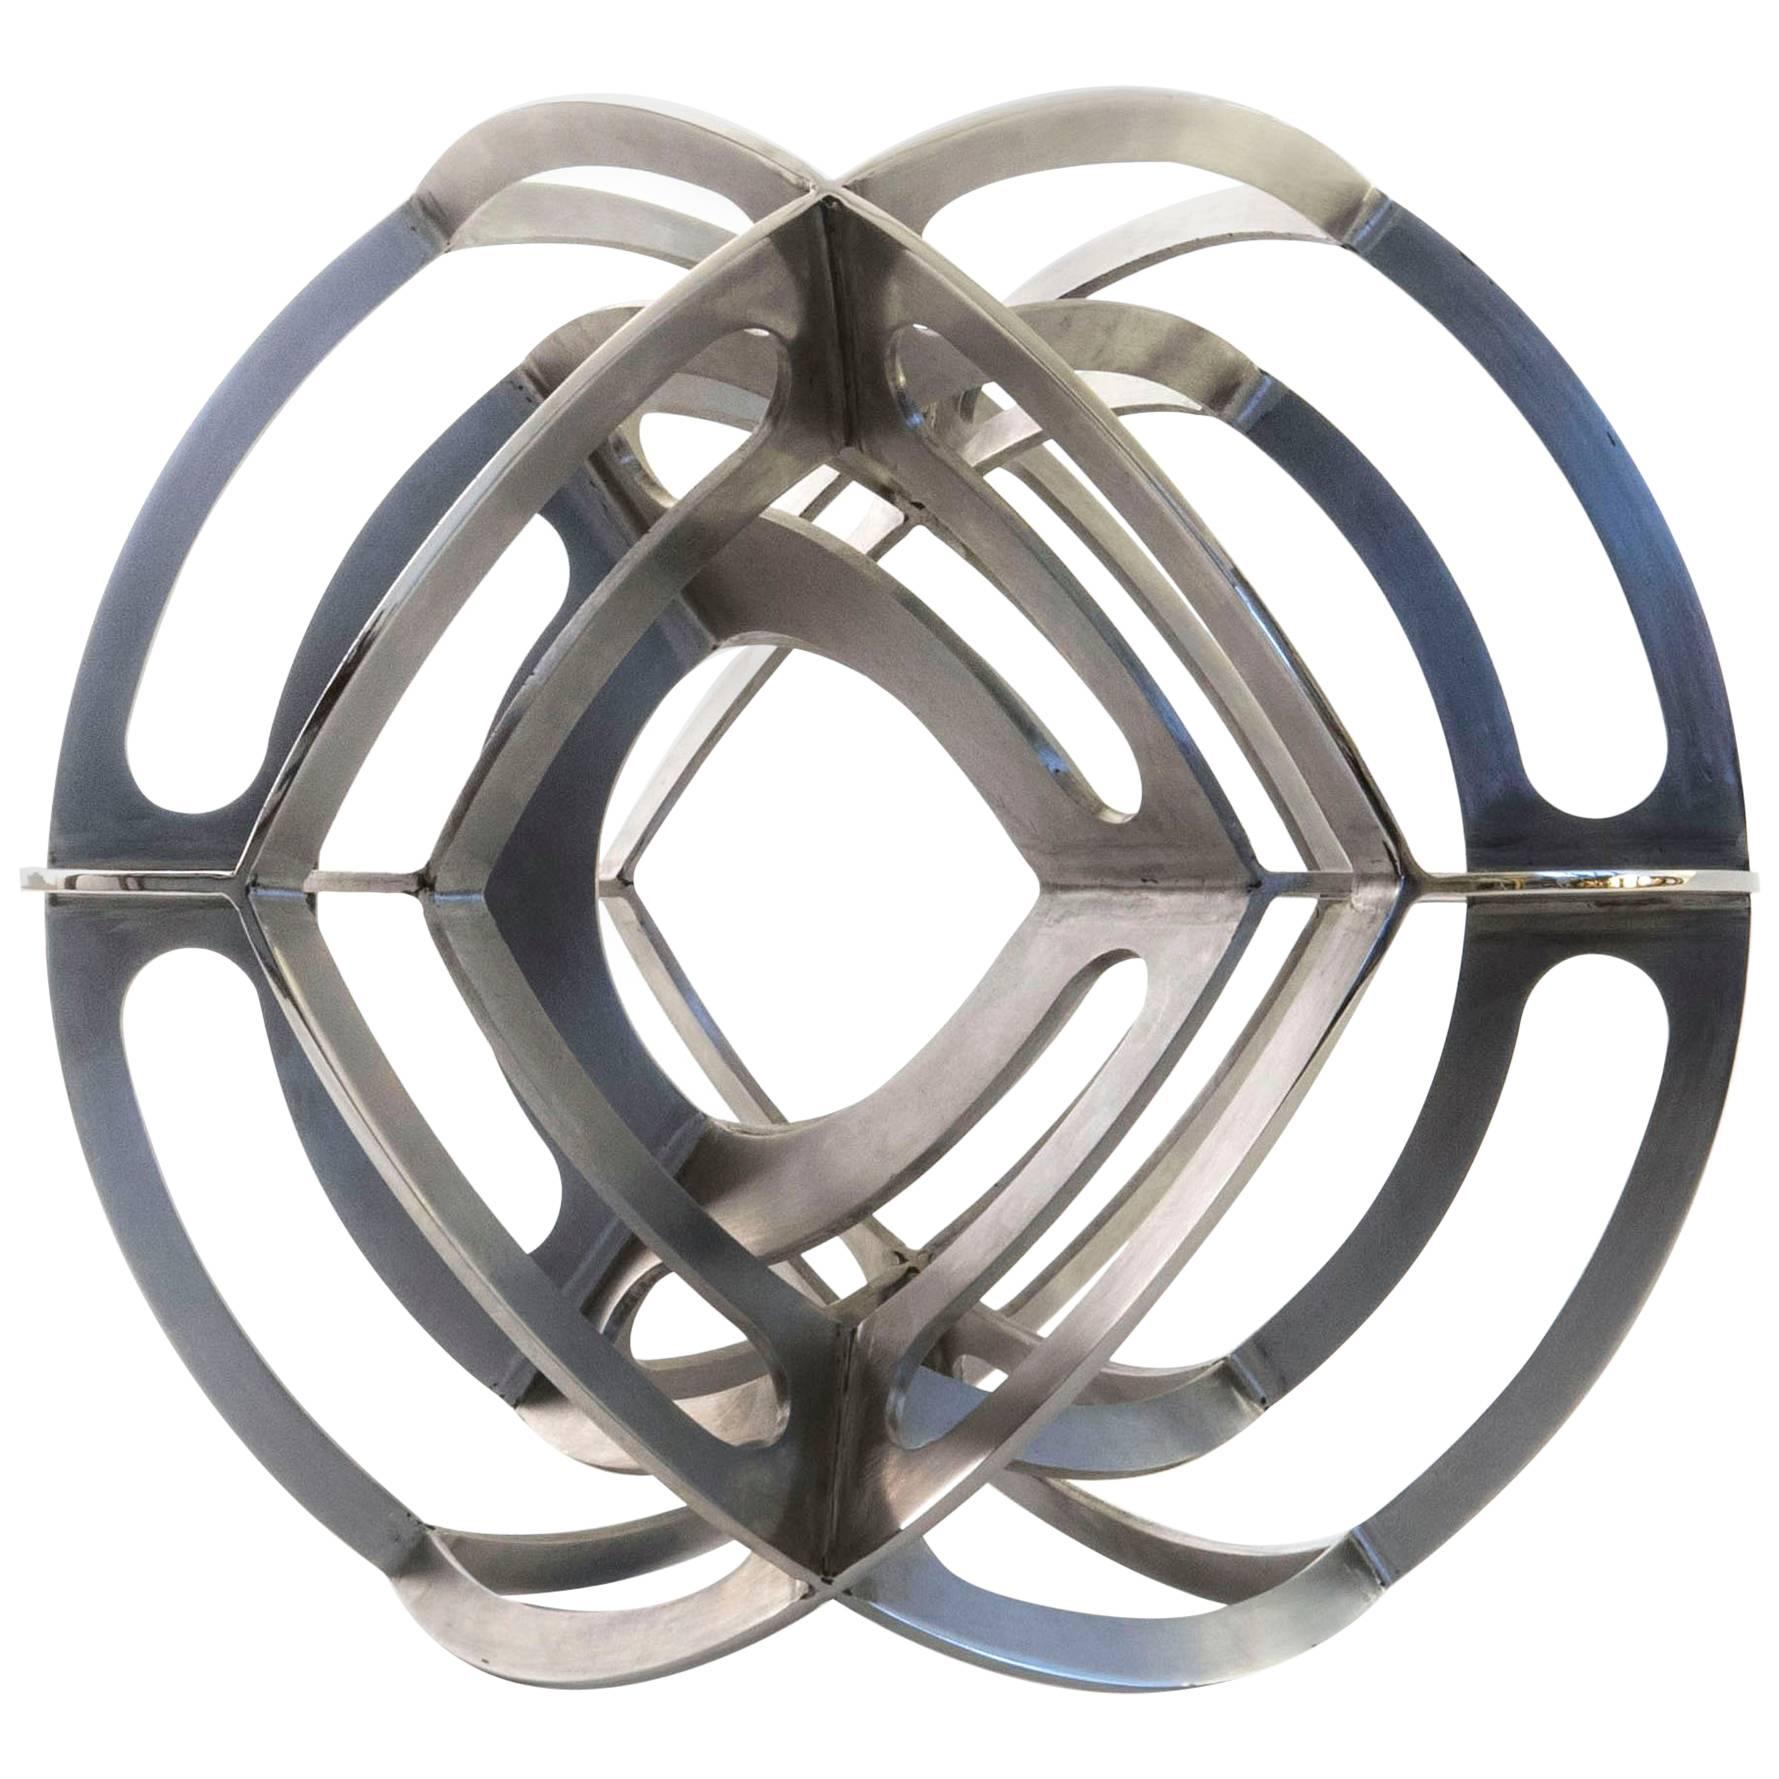 Contemporary Mexican Geometric Dual Tetrahedron Sphere Stainless Steel Sculpture For Sale